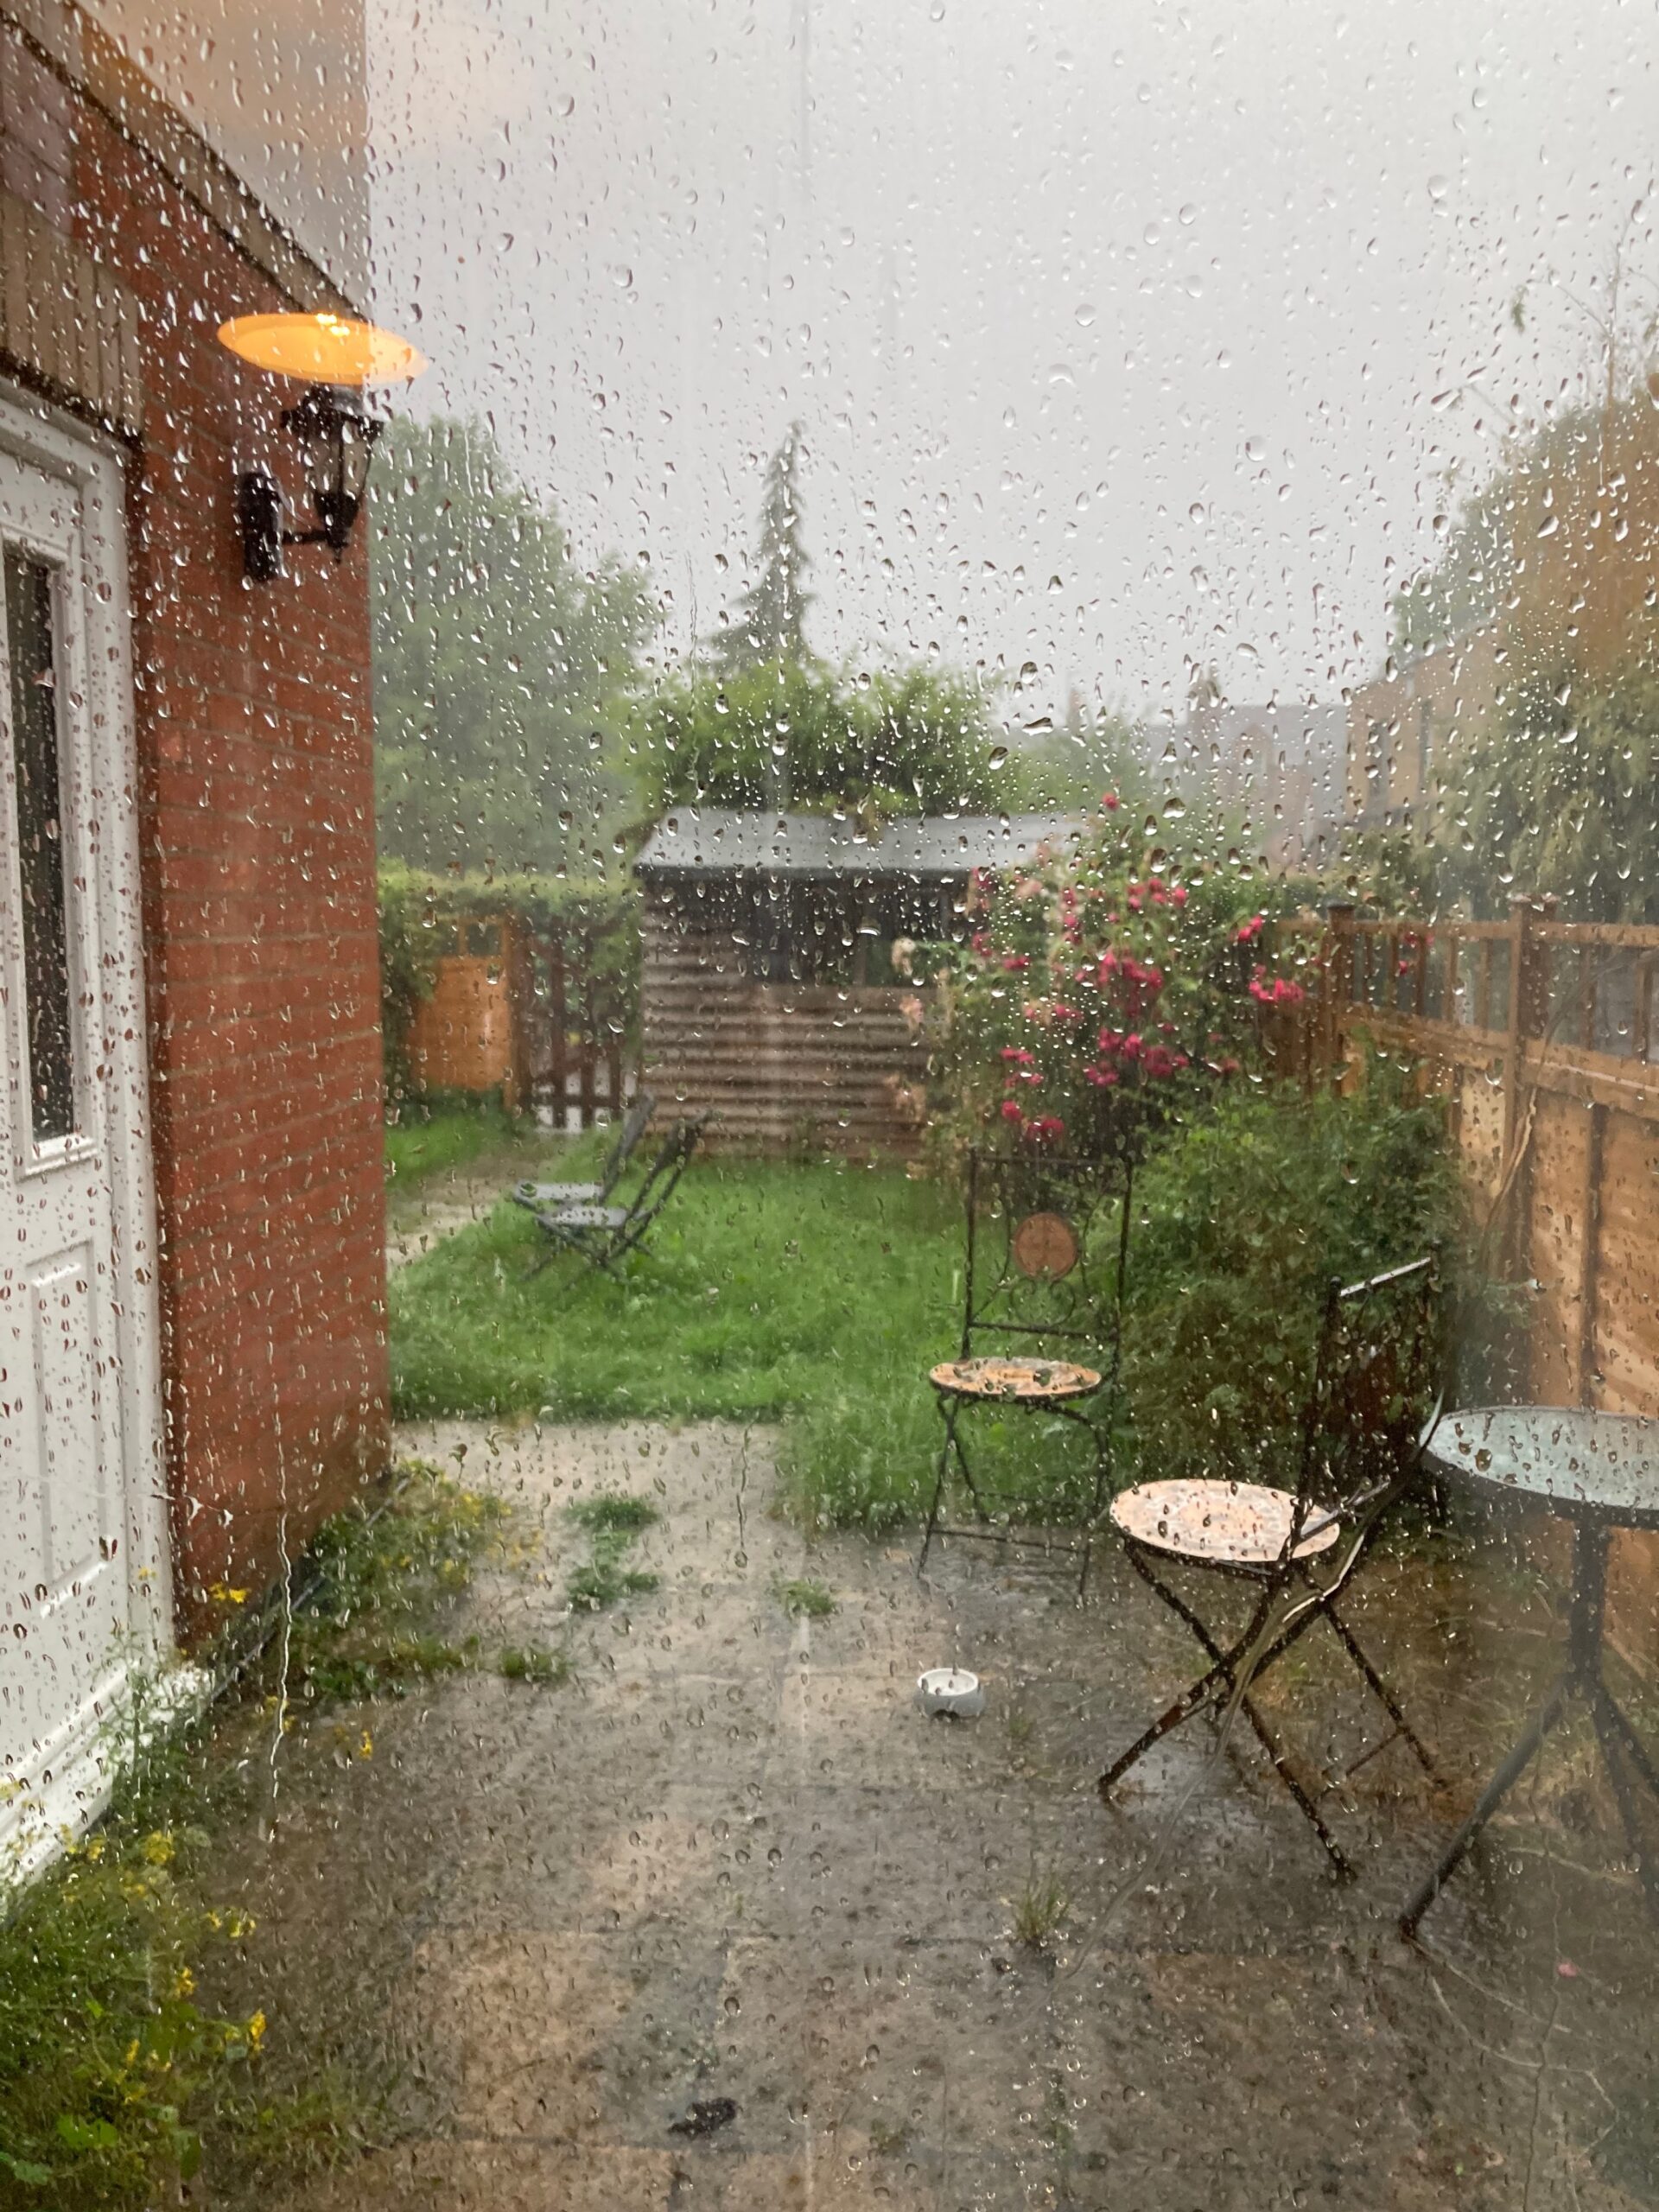 Our back garden, saturated with rain.